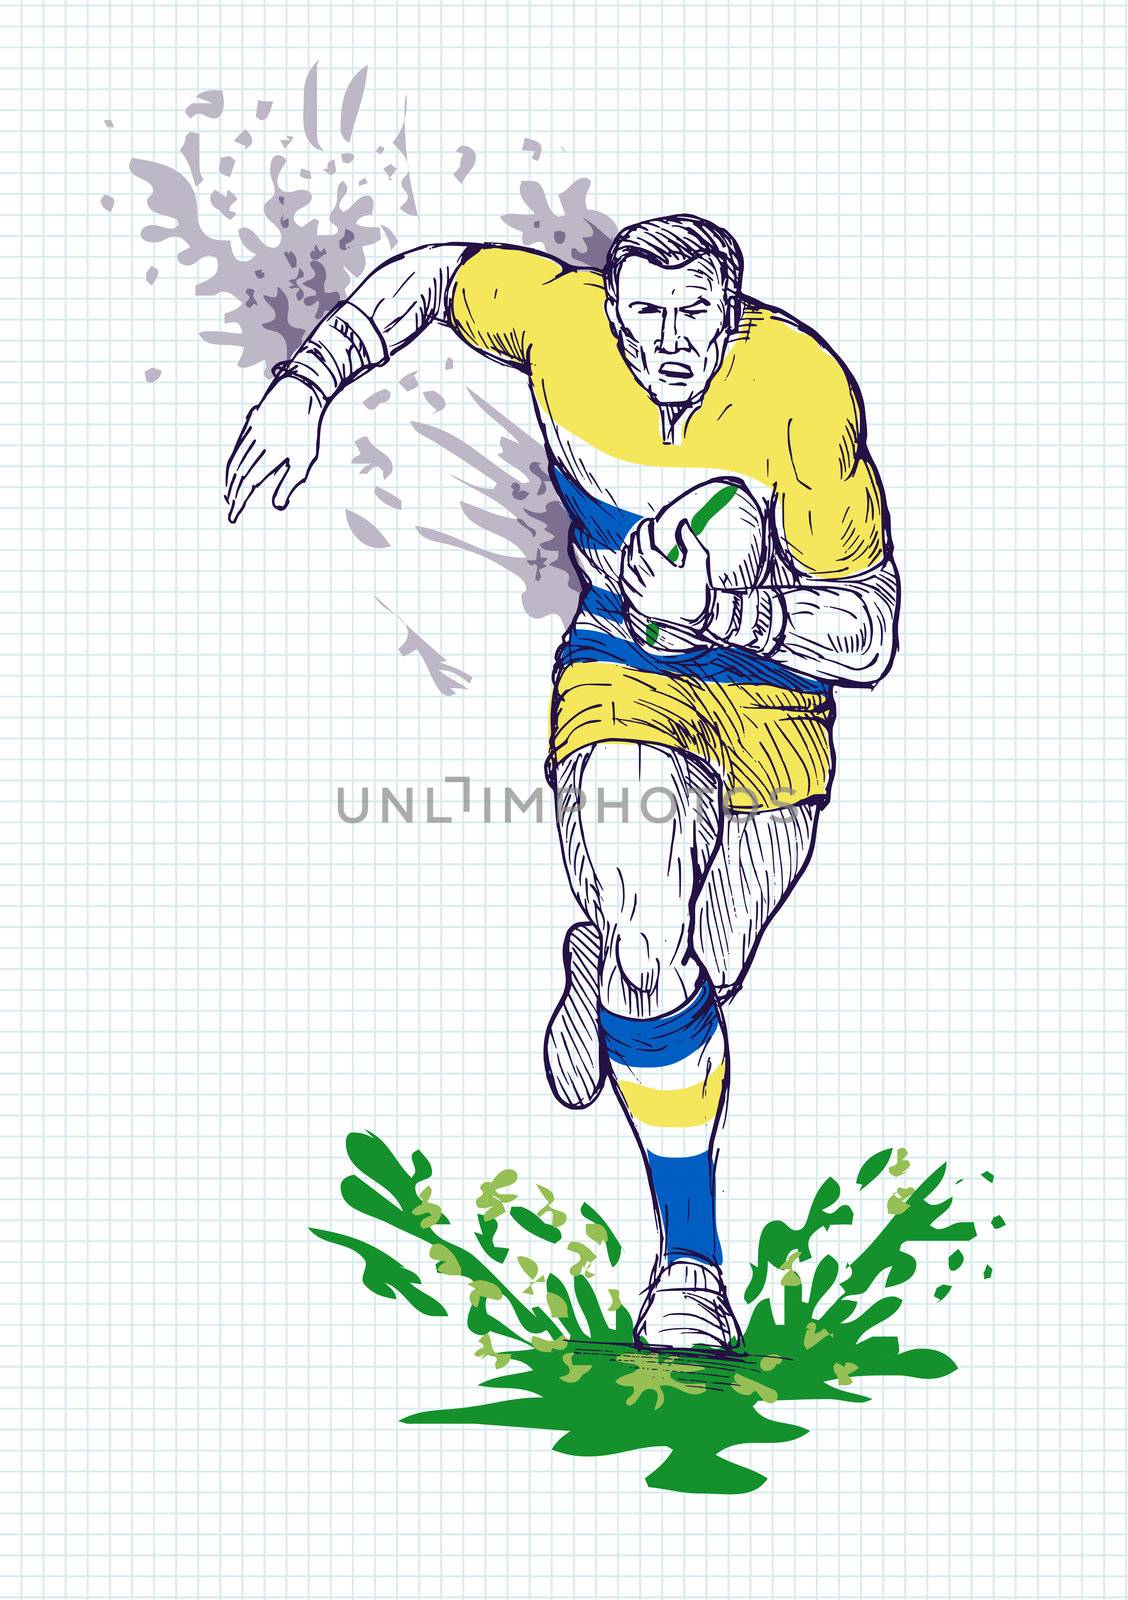 Rugby player running and passing ball by patrimonio